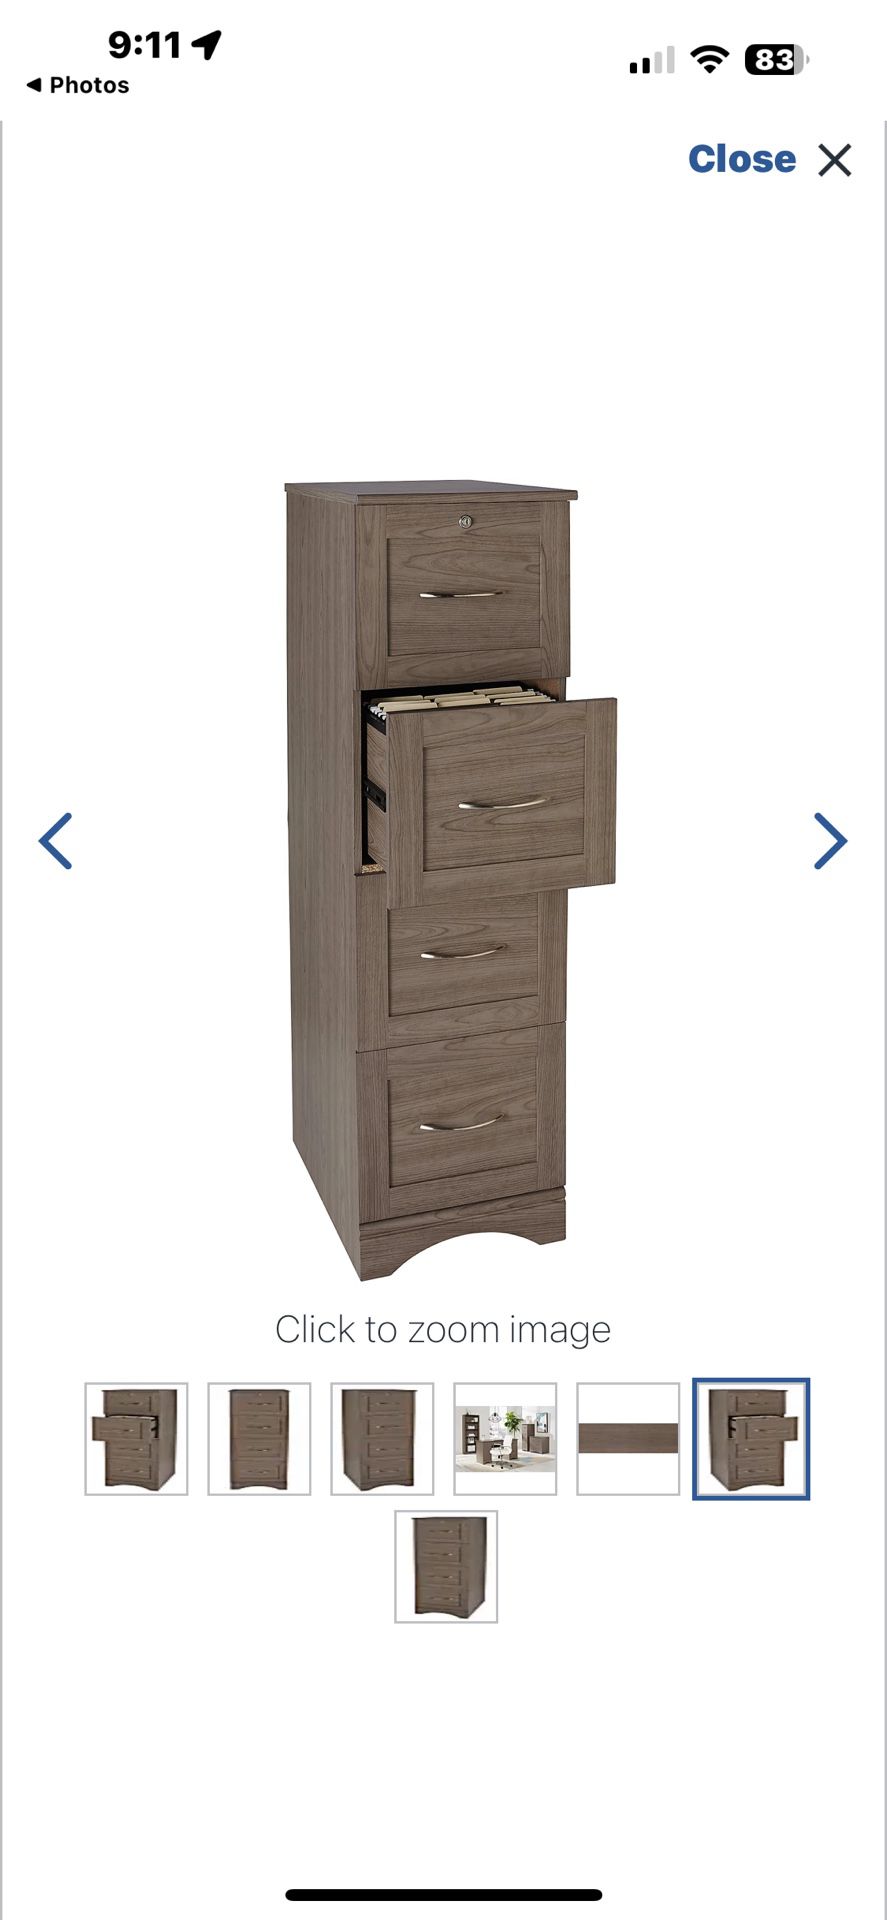 Vertical 4-Drawer Vertical File Cabinet, Gray NEW